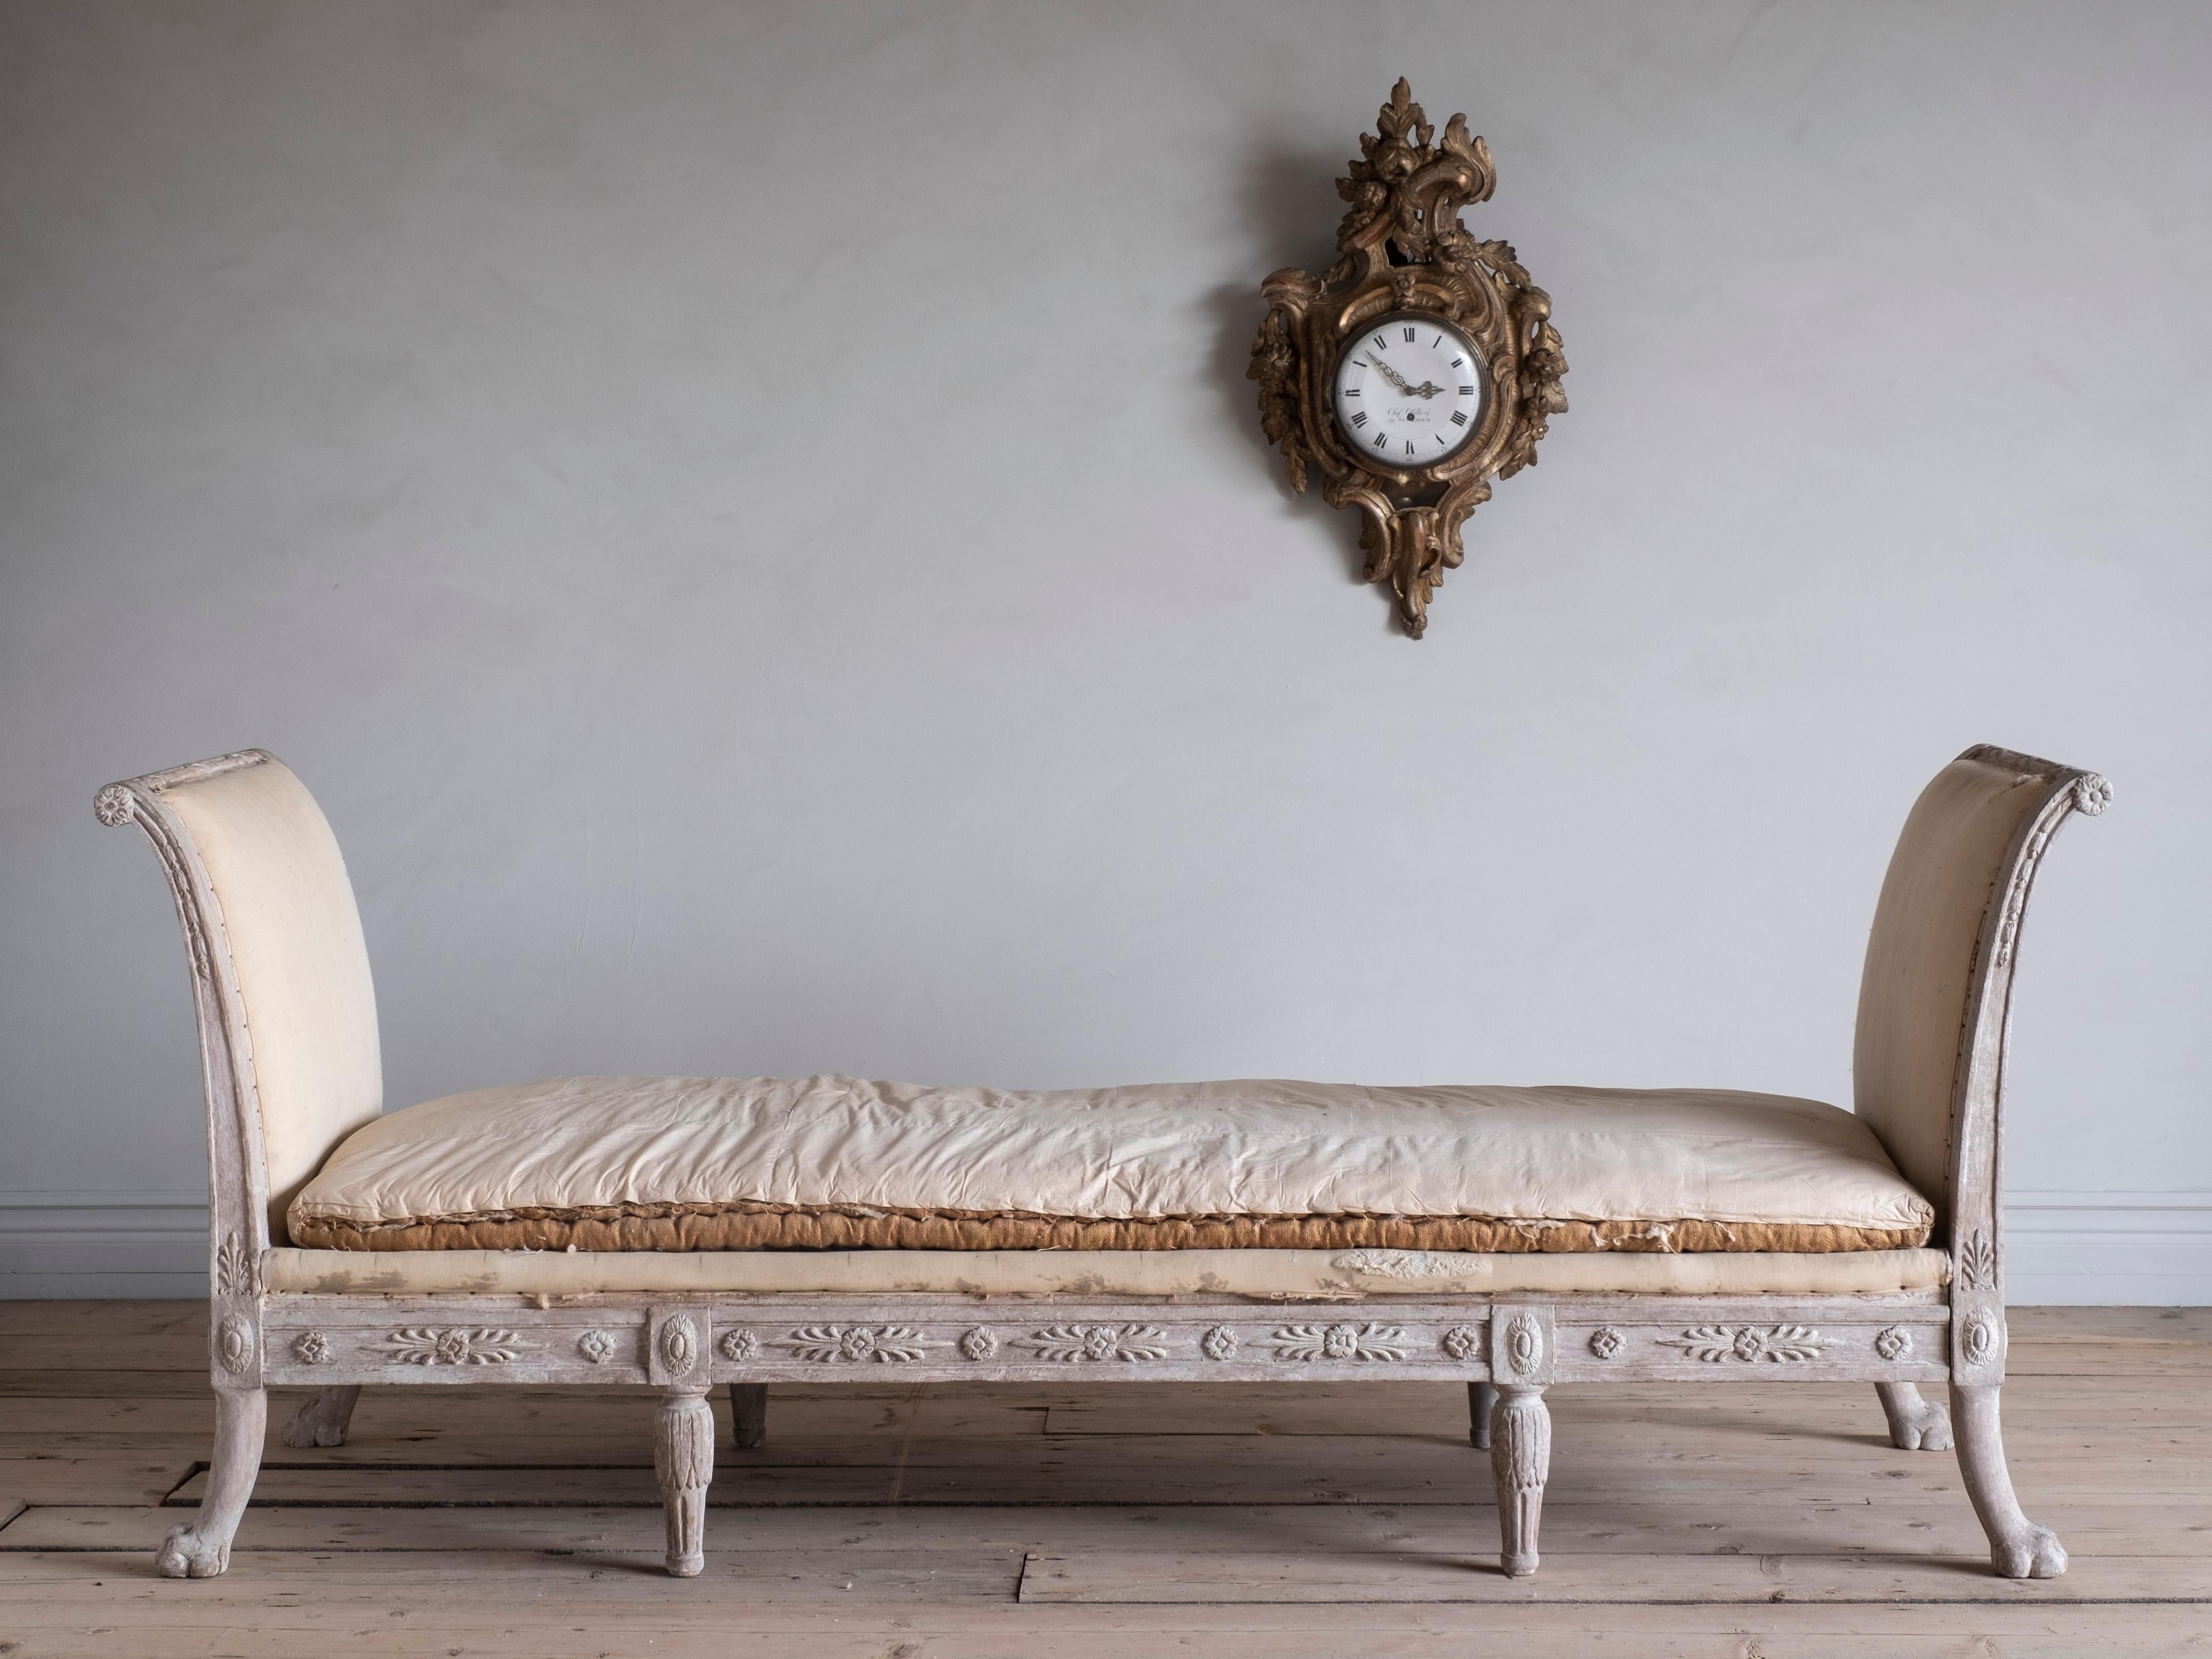 Elegant early 19th century Empire centre sofa / bench / daybed with Fine carvings and shape. Carved on both the back and front and works equally well against a wall or standing freely, circa 1820 Sweden. 

Good condition, wear consistent with age